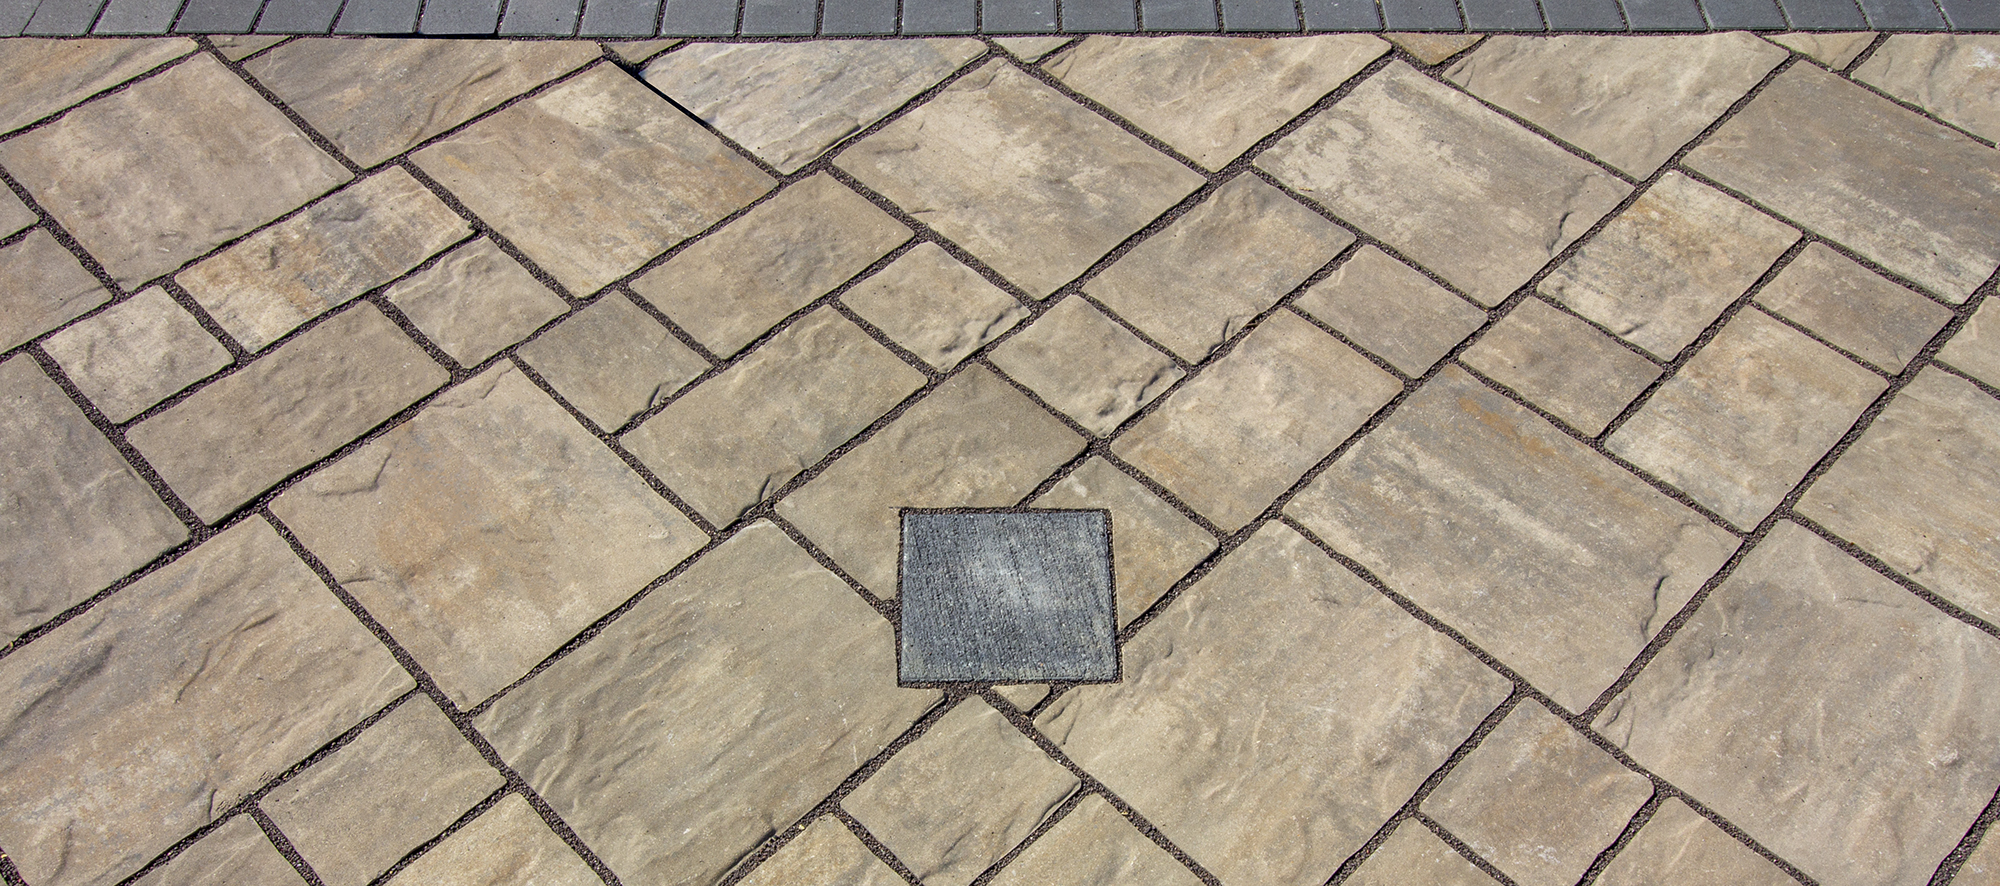 Thornbury pavers with a textured finish in beiges and warm browns with a small dark drey square with a brushed finish.